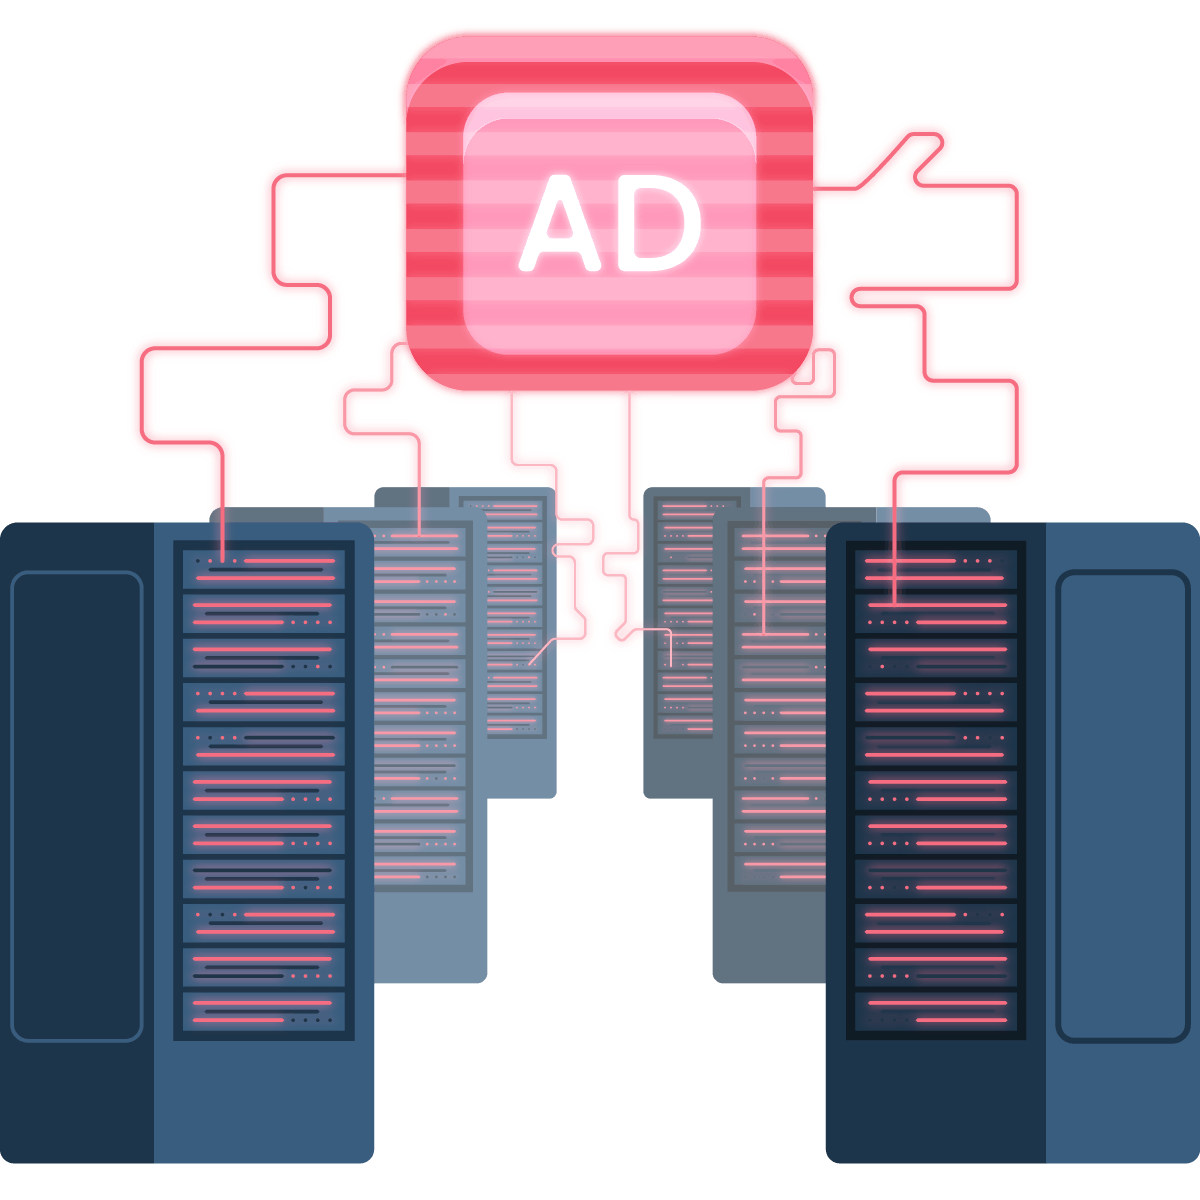 Running an ad network is extremely difficult